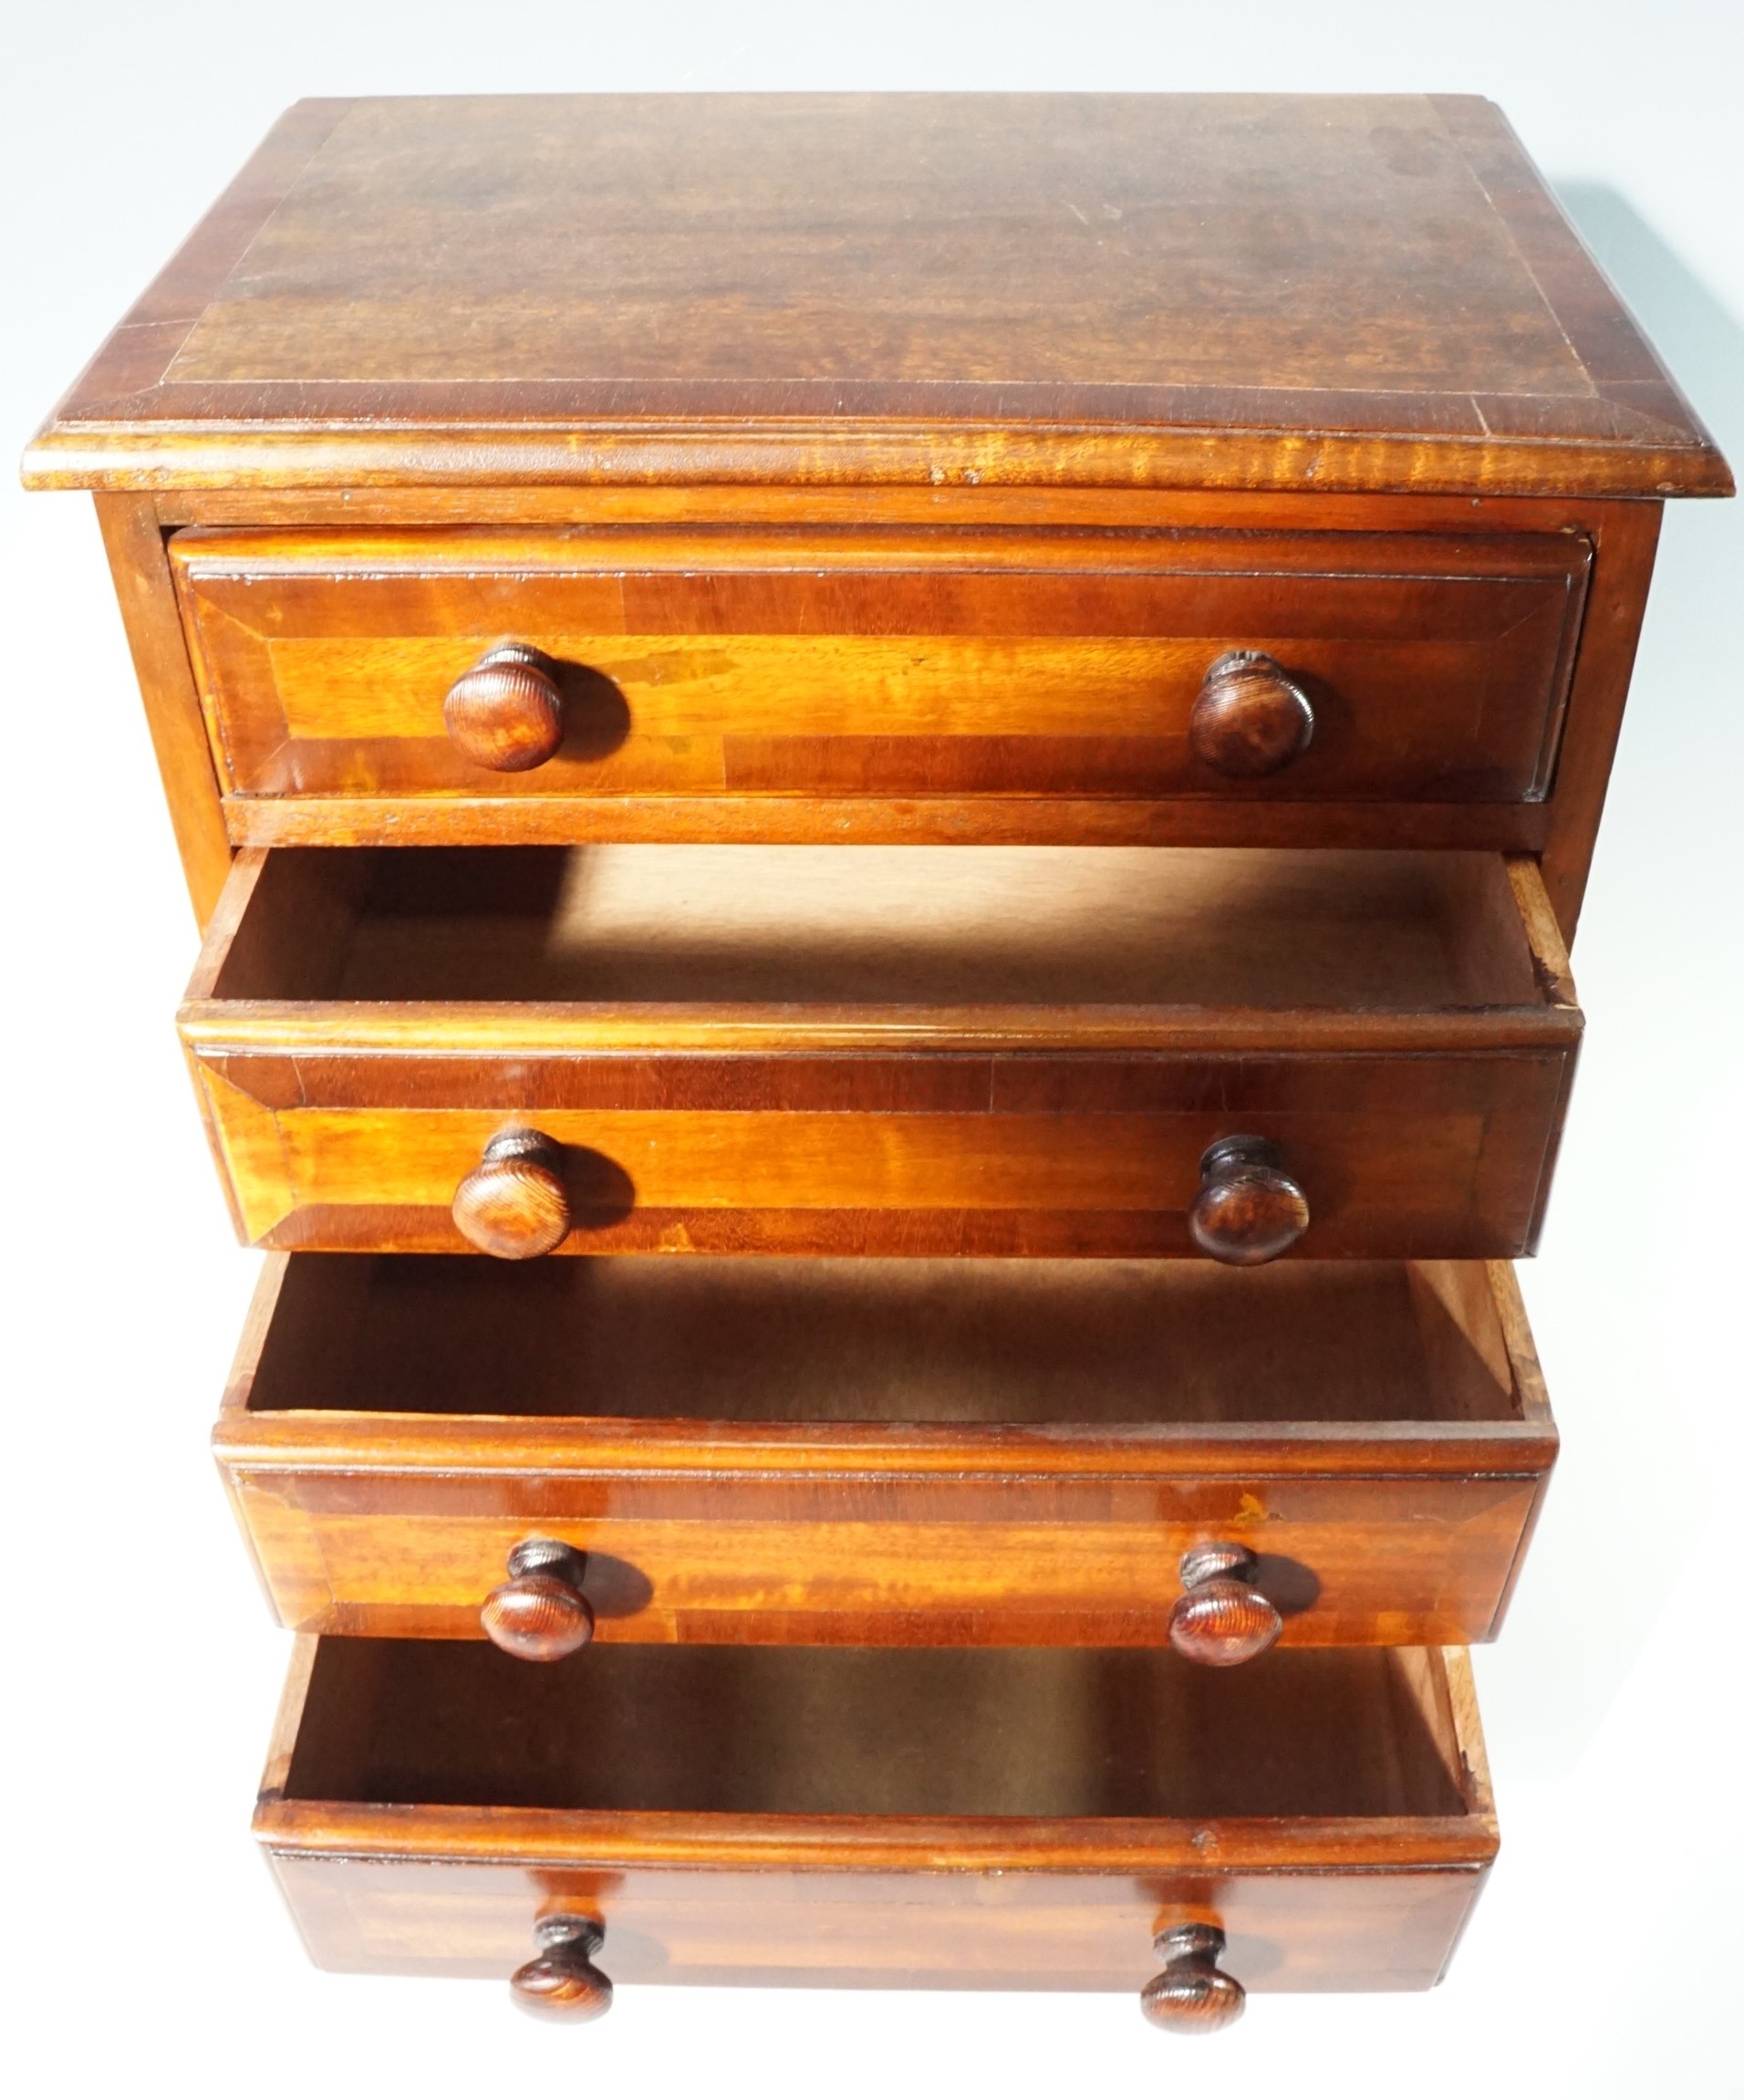 A miniature early 19th Century style mahogany cross-banded chest of drawers, 43 cm x 29 cm x 53 cm - Image 3 of 5